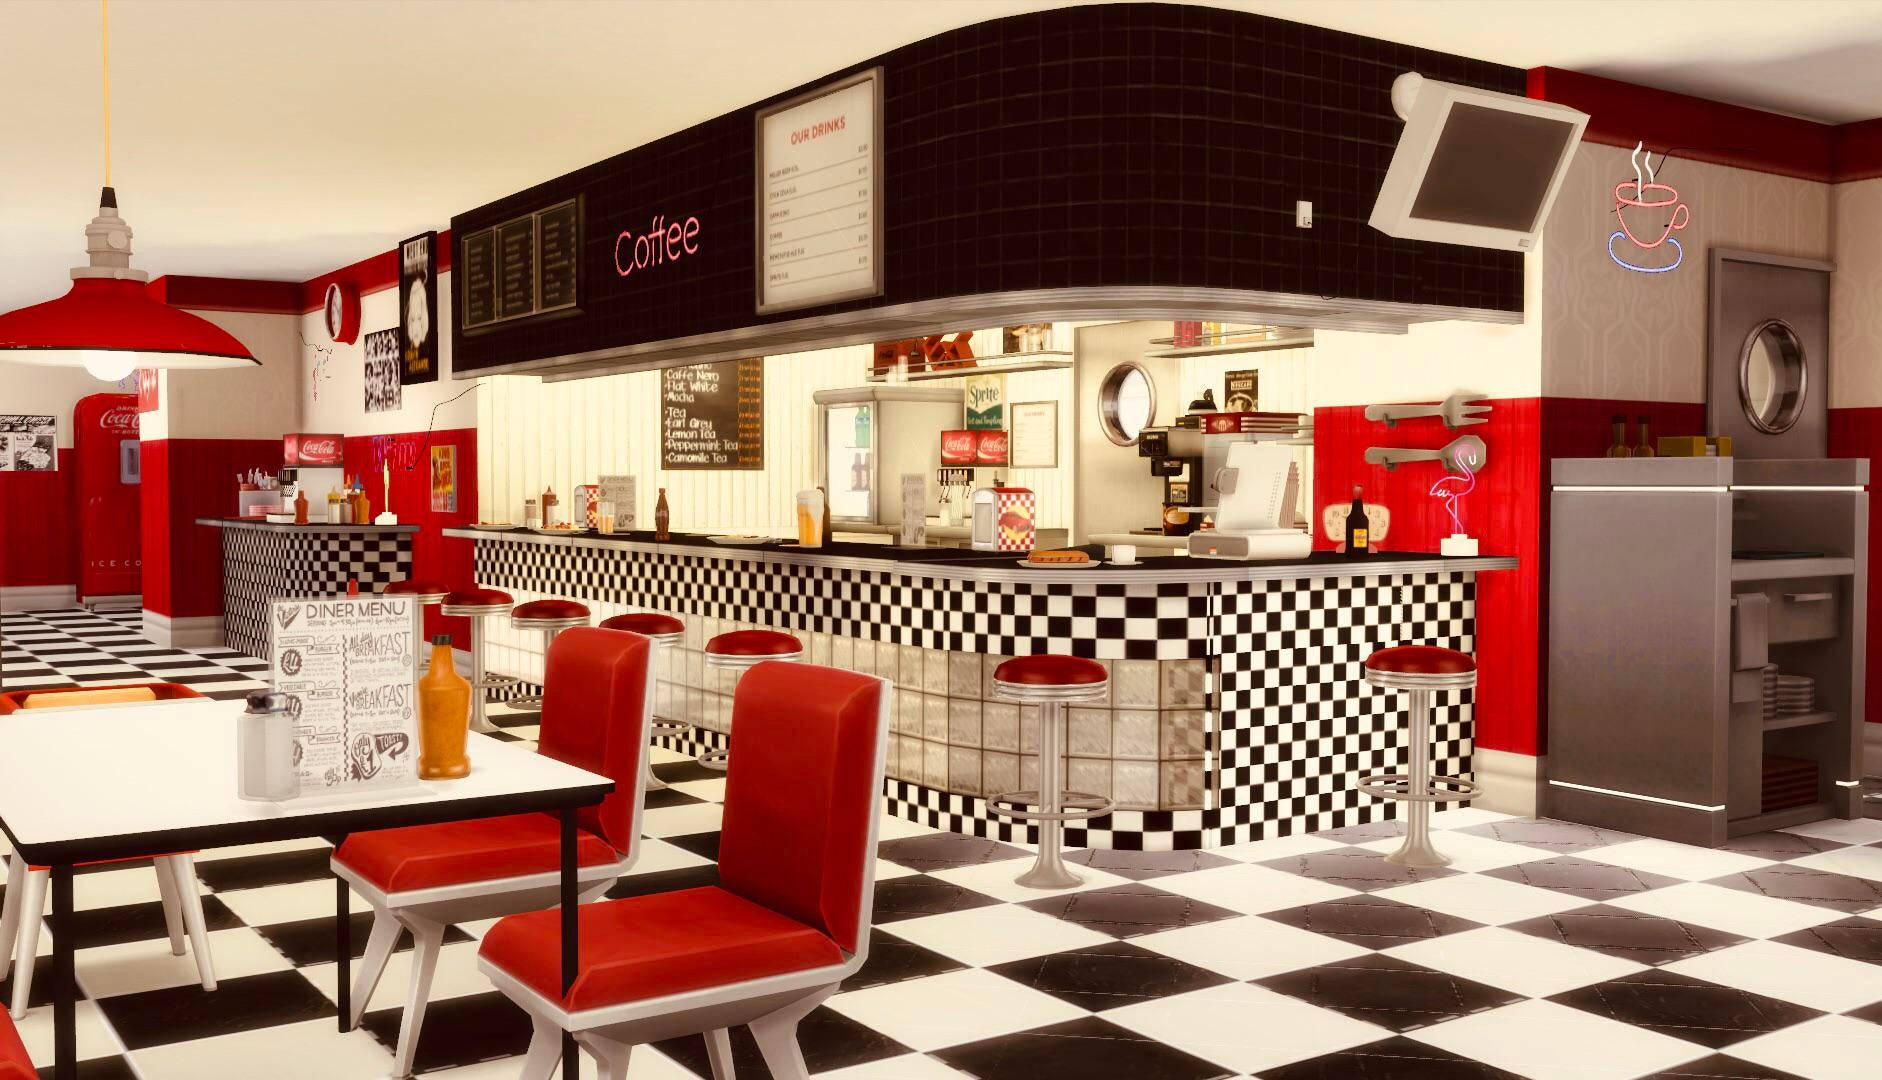 Coffee At 50s Diner Wallpaper